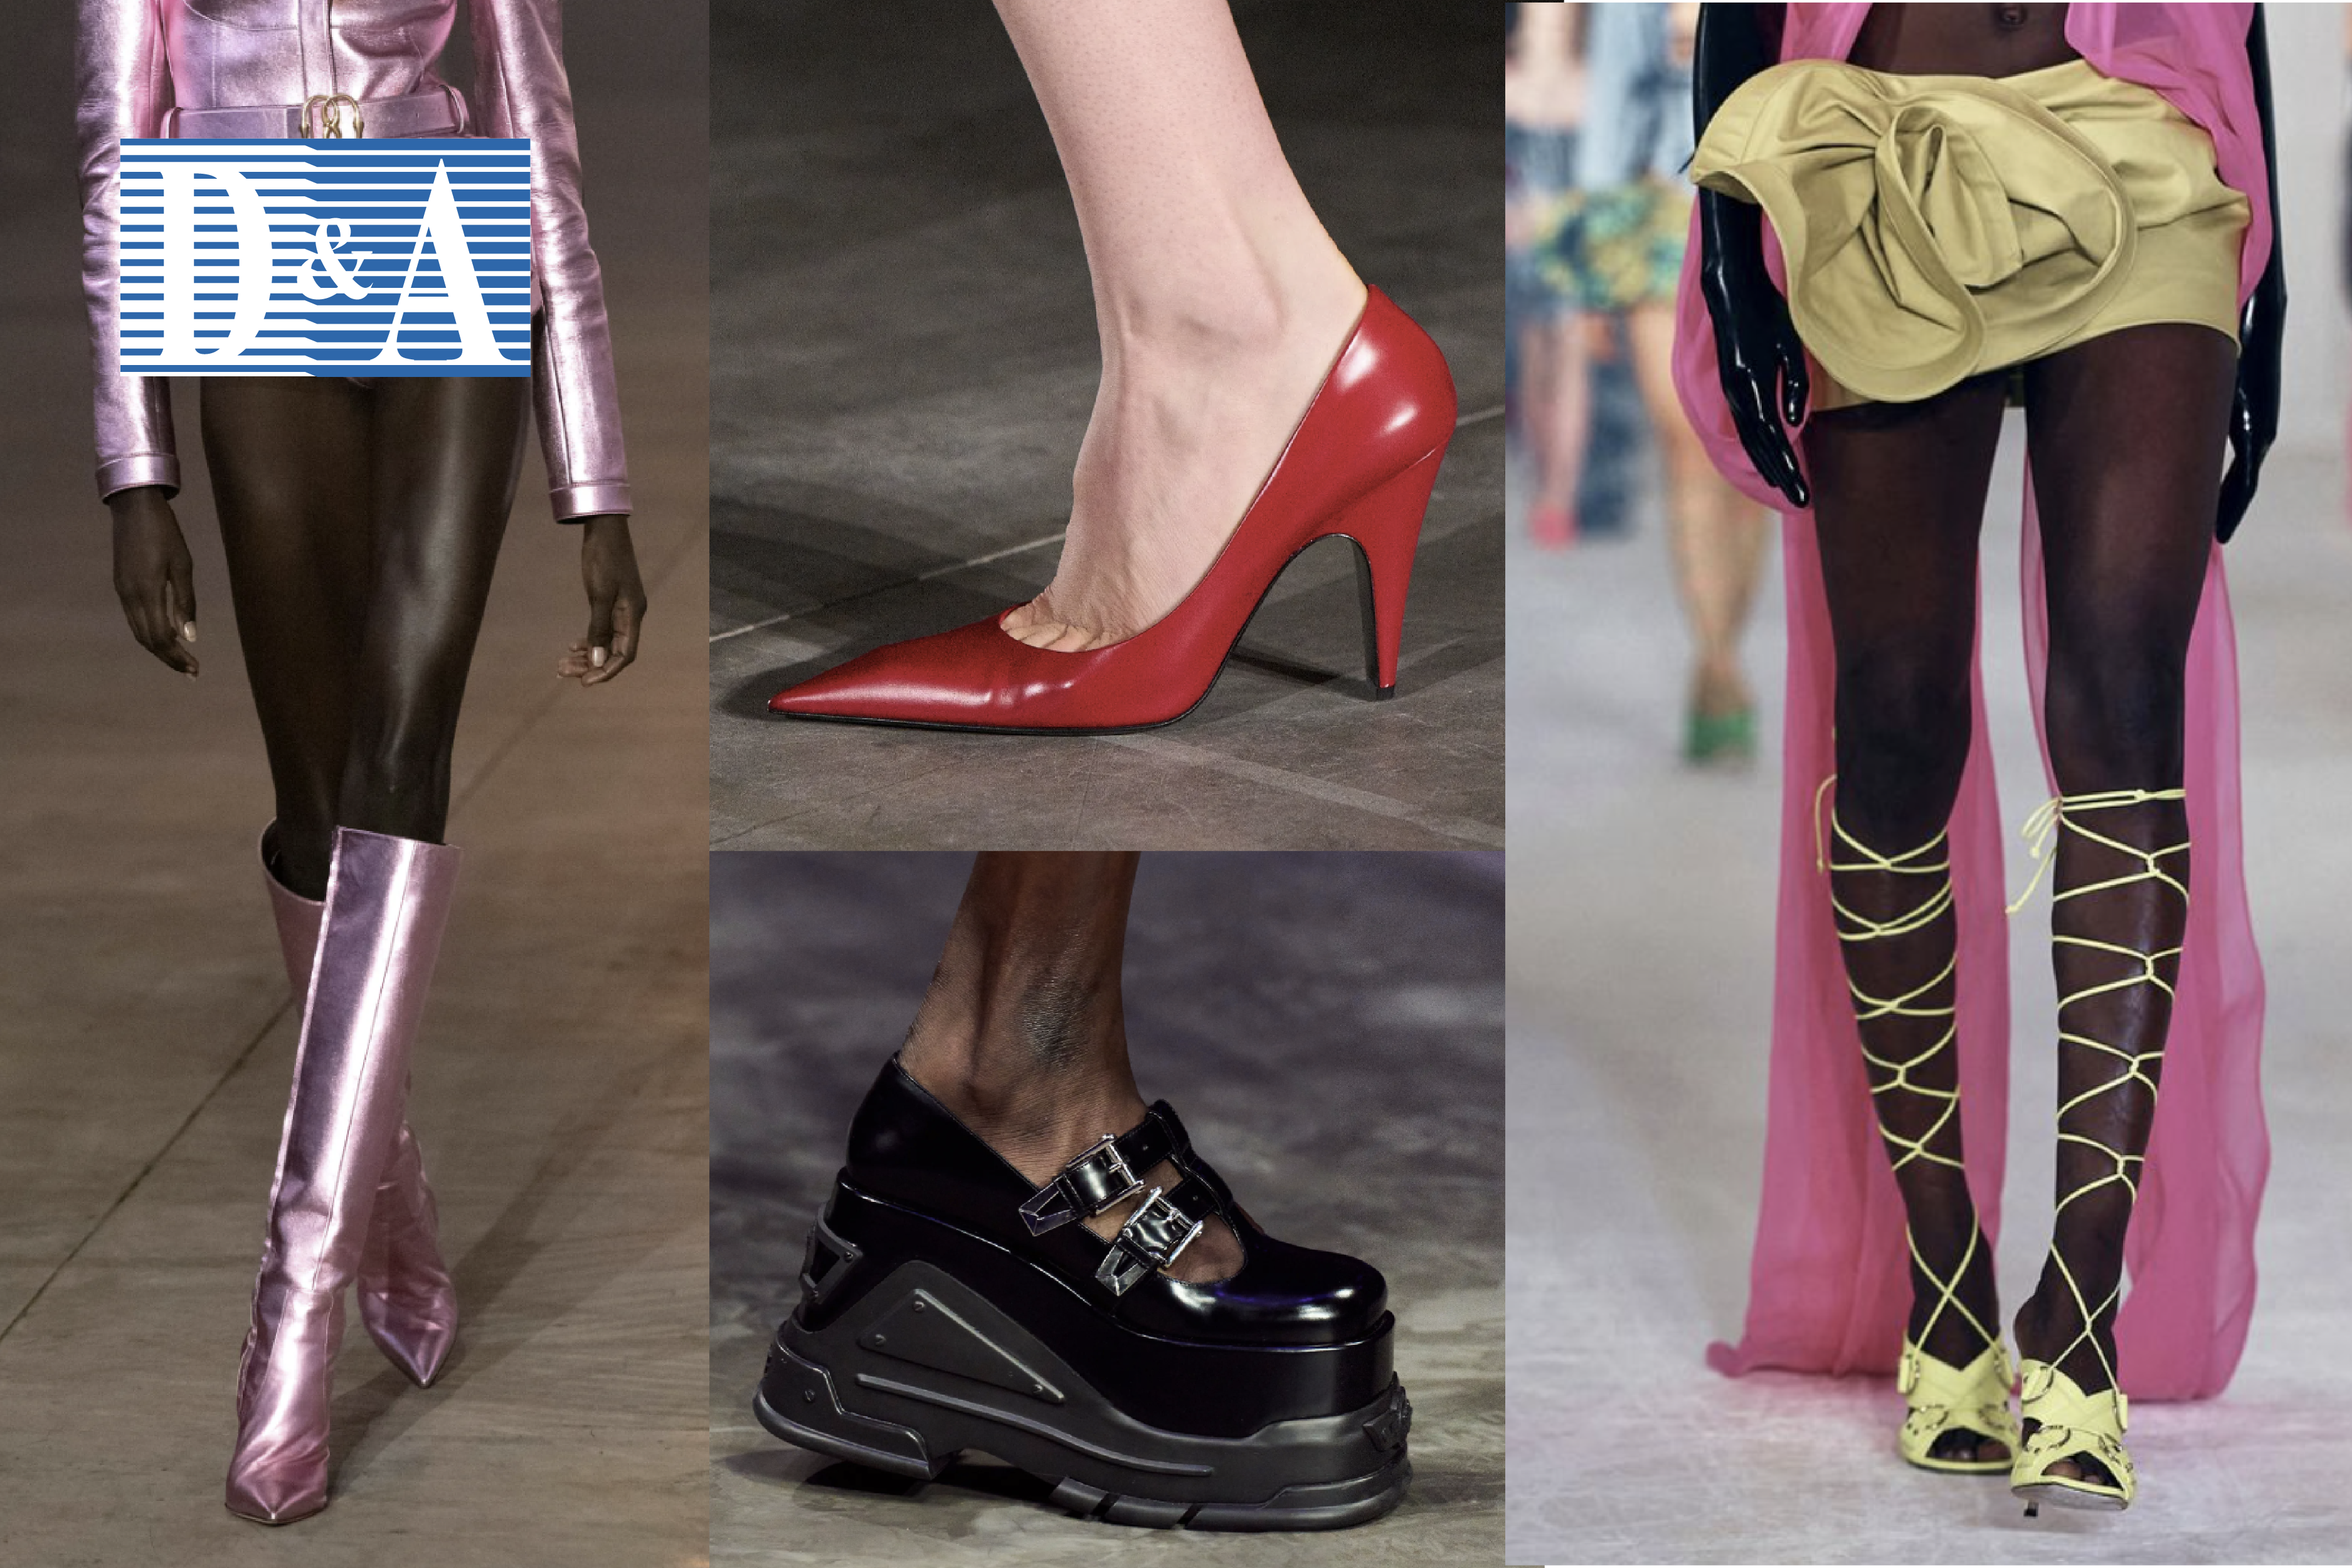 10 Top Trending Shoes for Women in 2023 - The Trend Spotter